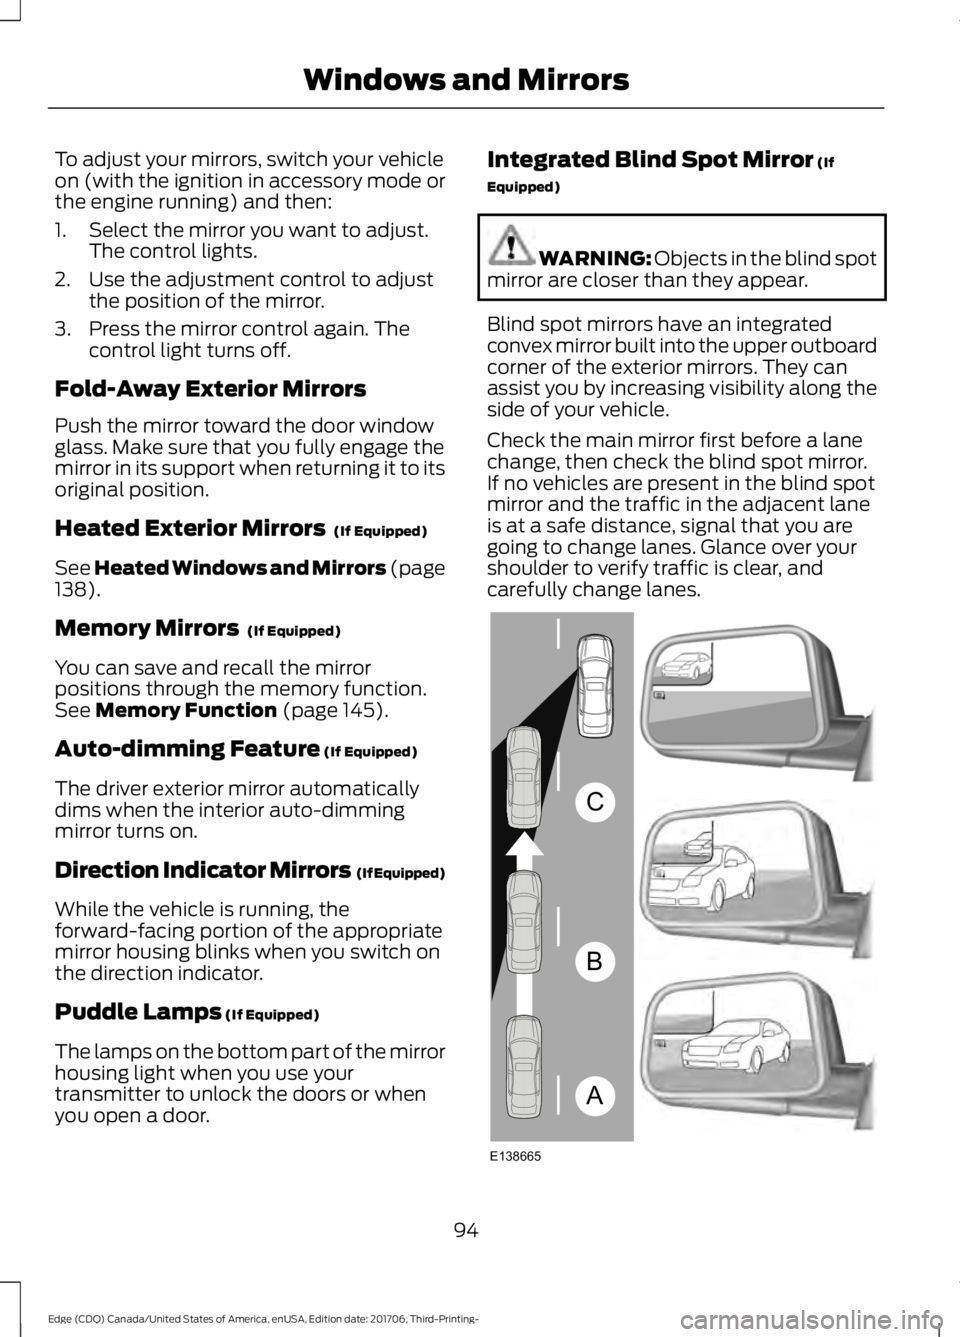 FORD EDGE 2018  Owners Manual To adjust your mirrors, switch your vehicle
on (with the ignition in accessory mode or
the engine running) and then:
1. Select the mirror you want to adjust.
The control lights.
2. Use the adjustment 